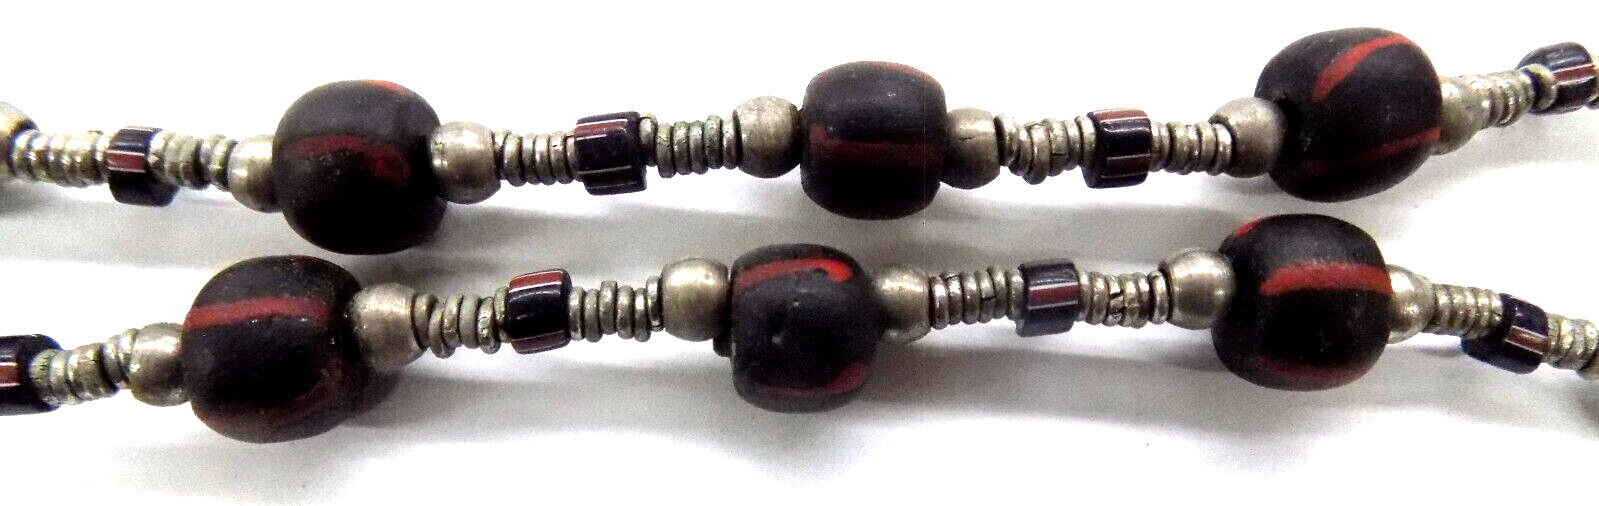 Fancy Strand OLD Mixed Glass W/ Silver  African Trade Beads  #23 Bin W91